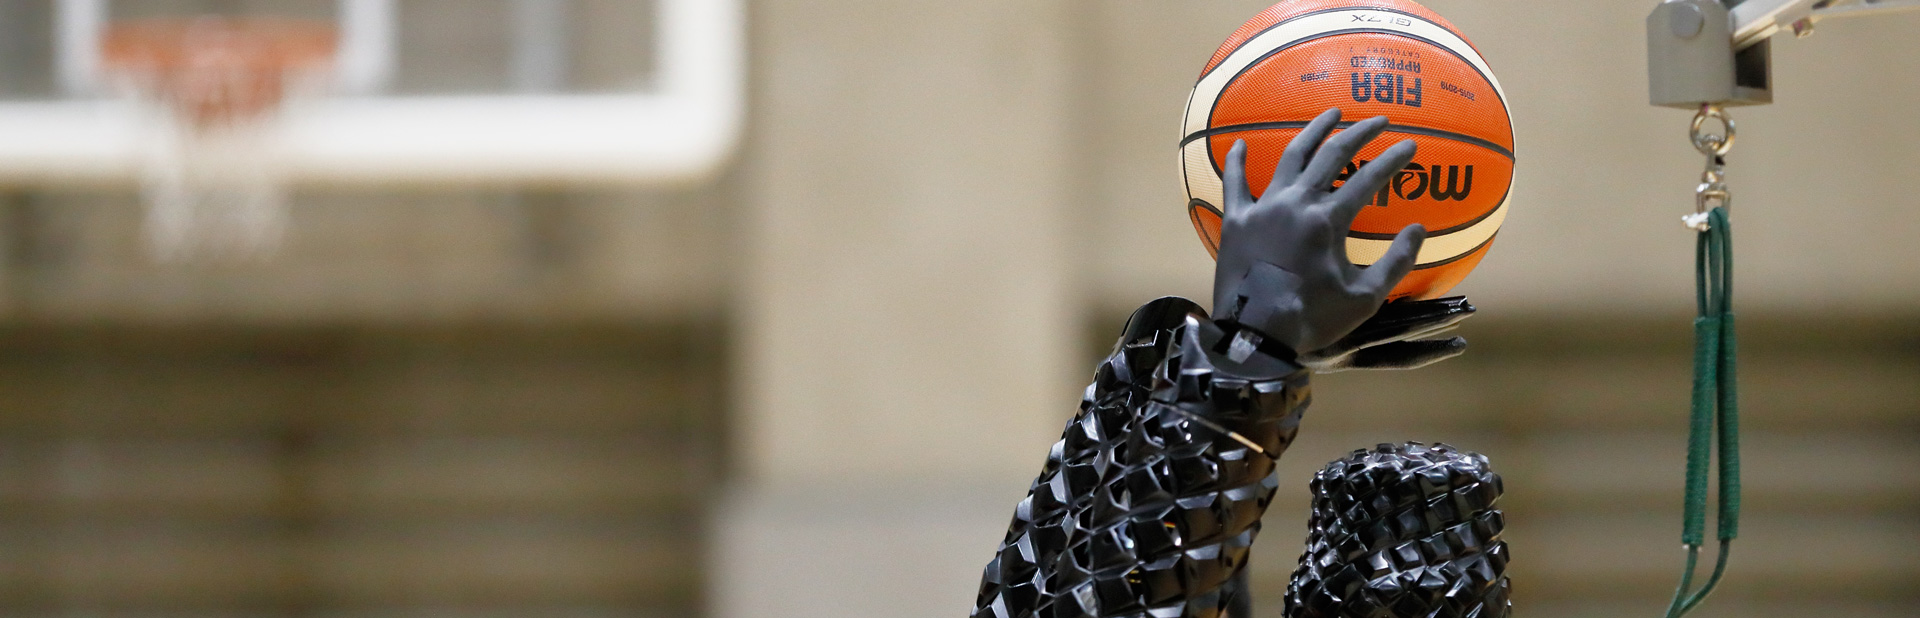 The Development Diary of CUE, the AI Basketball Robot: Second story